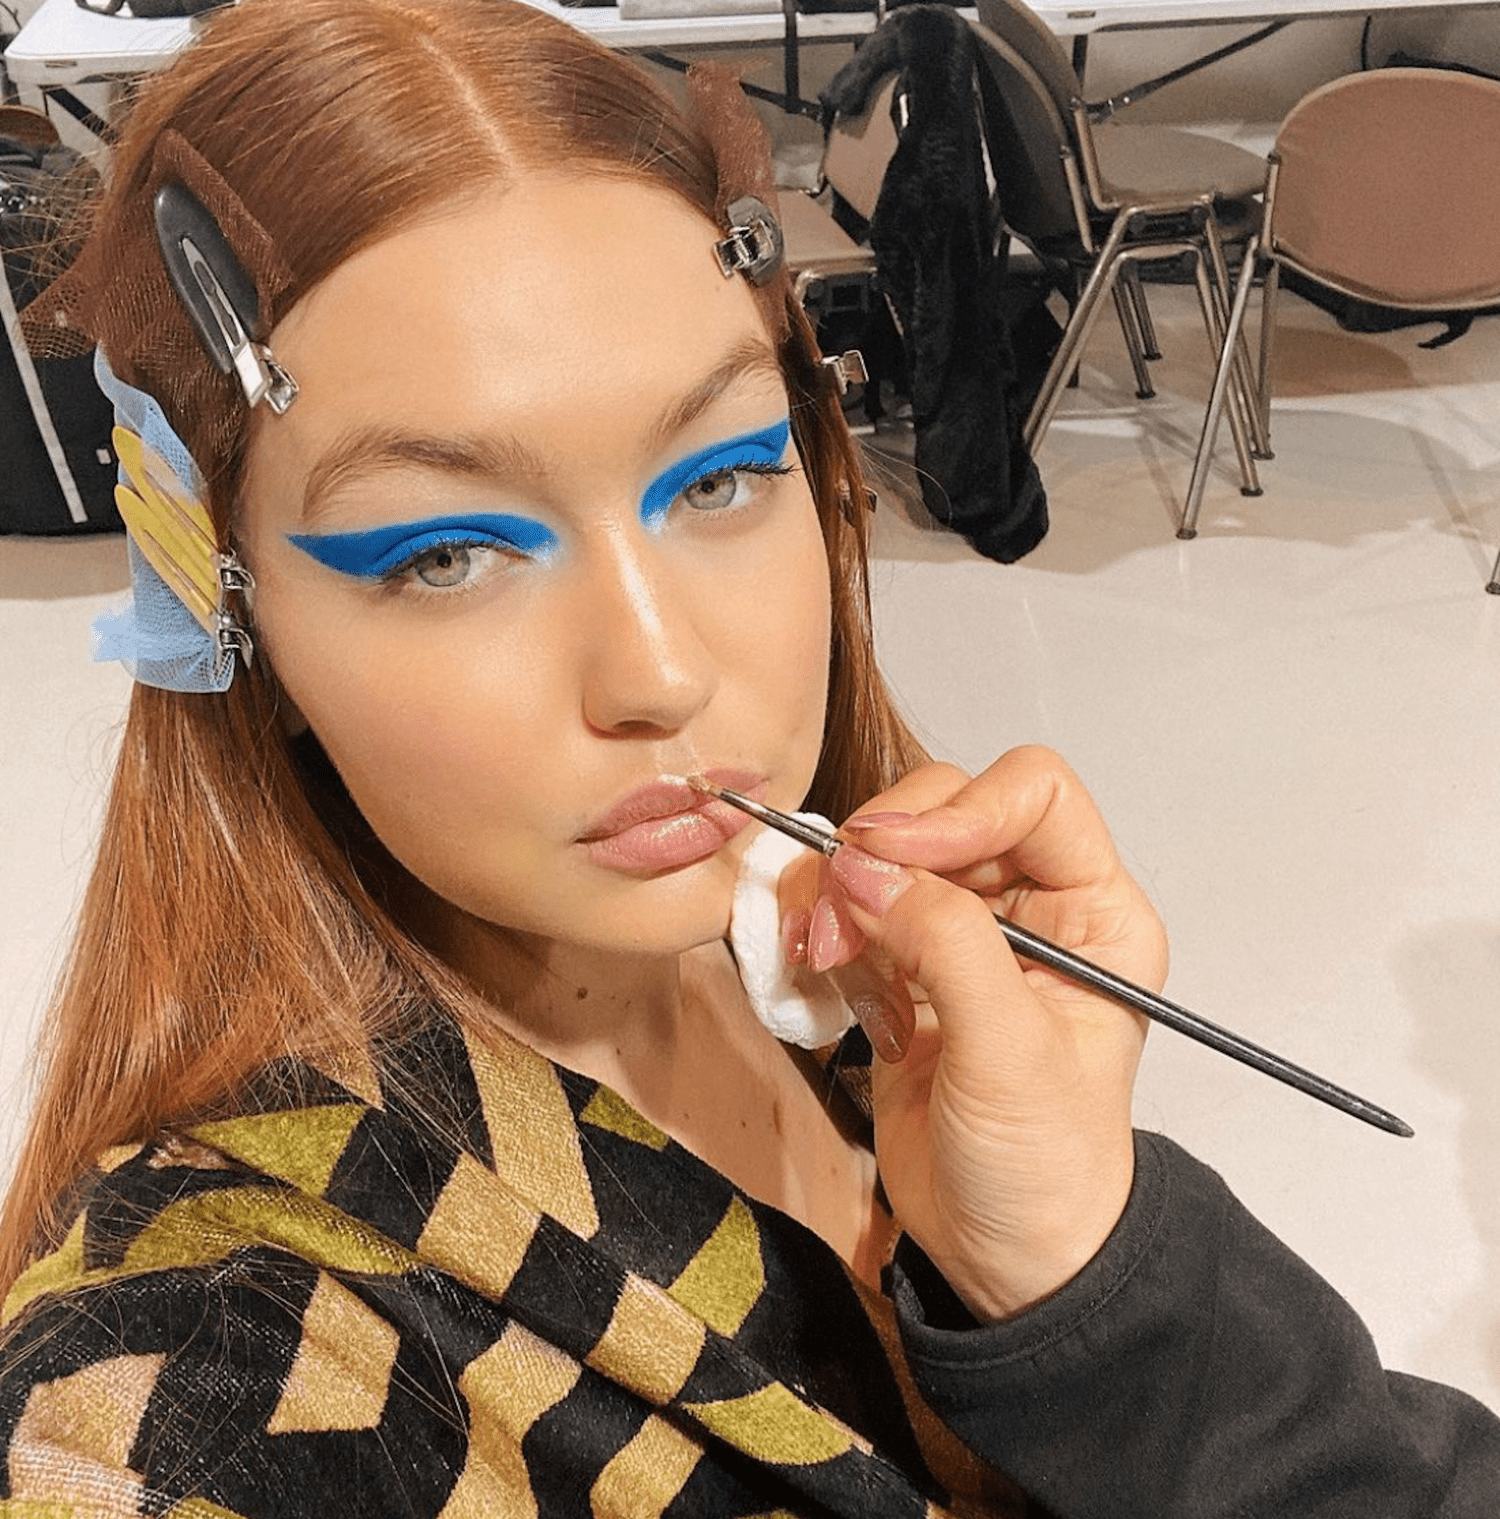 GIGI HADID GETS HER HAIR AND MAKEUP DONE BACKSTAGE AT FASHION WEEK